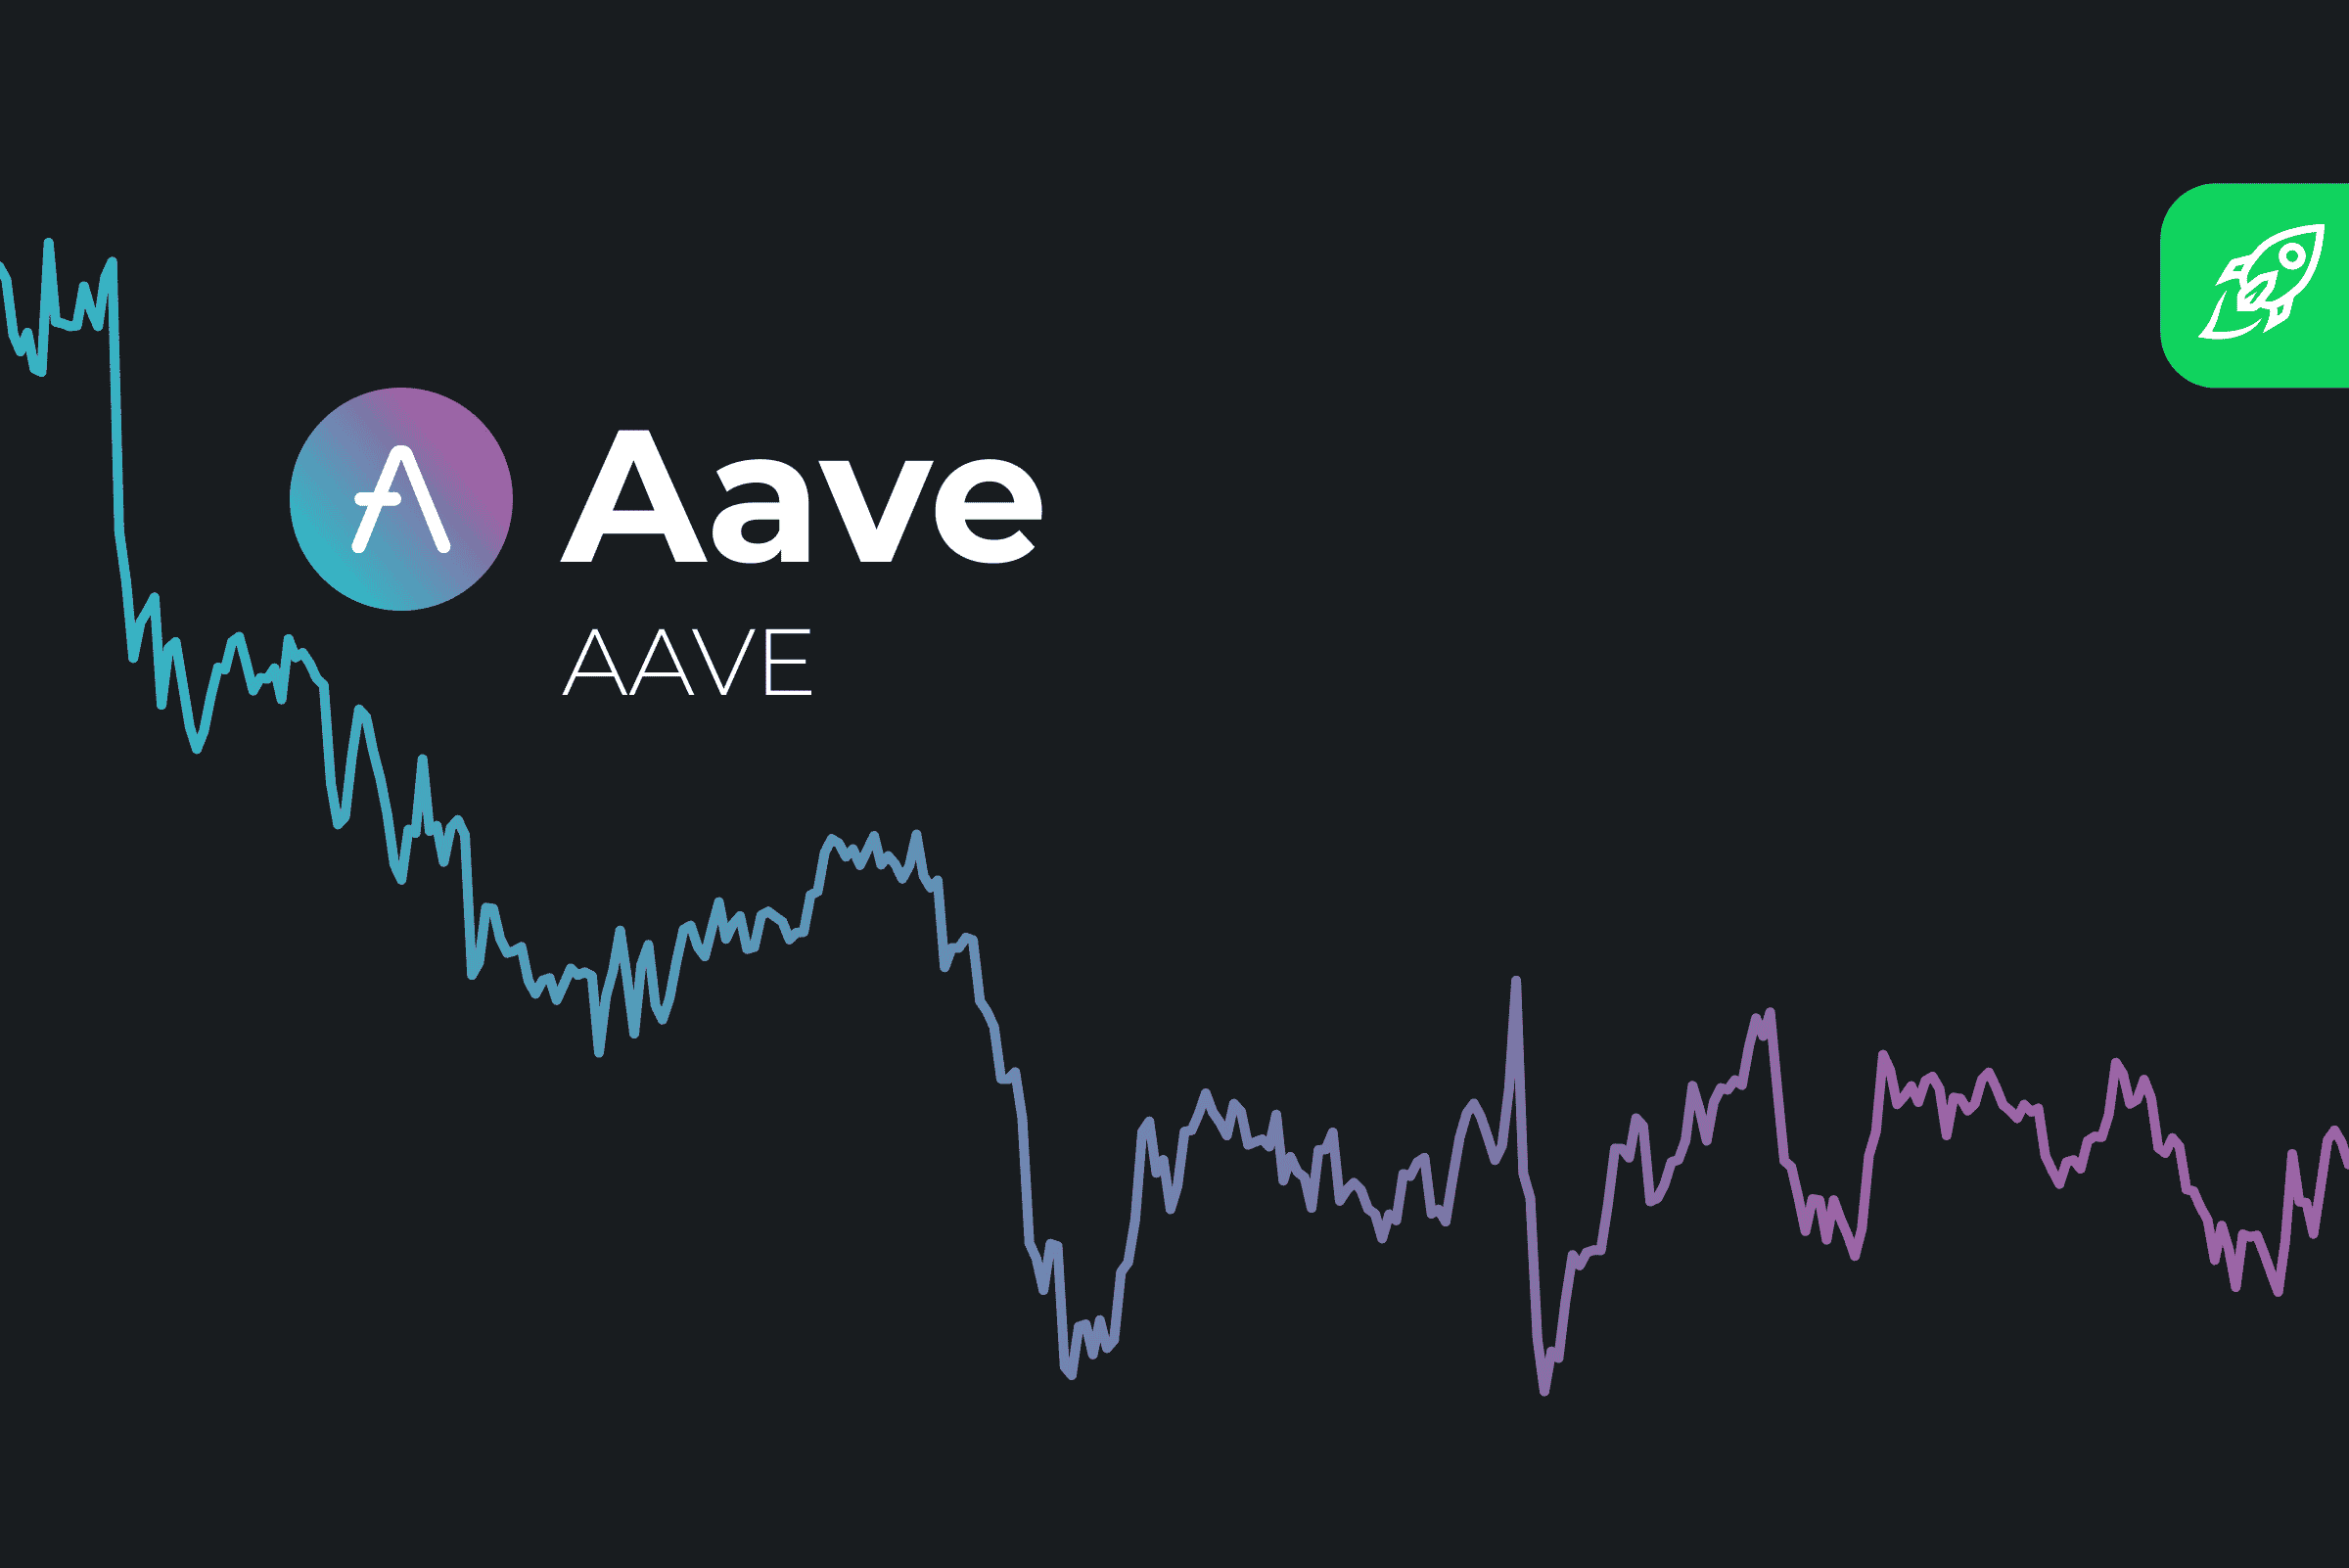 Aave (AAVE) Price Prediction 2022 2023 2024 2025 - 2031